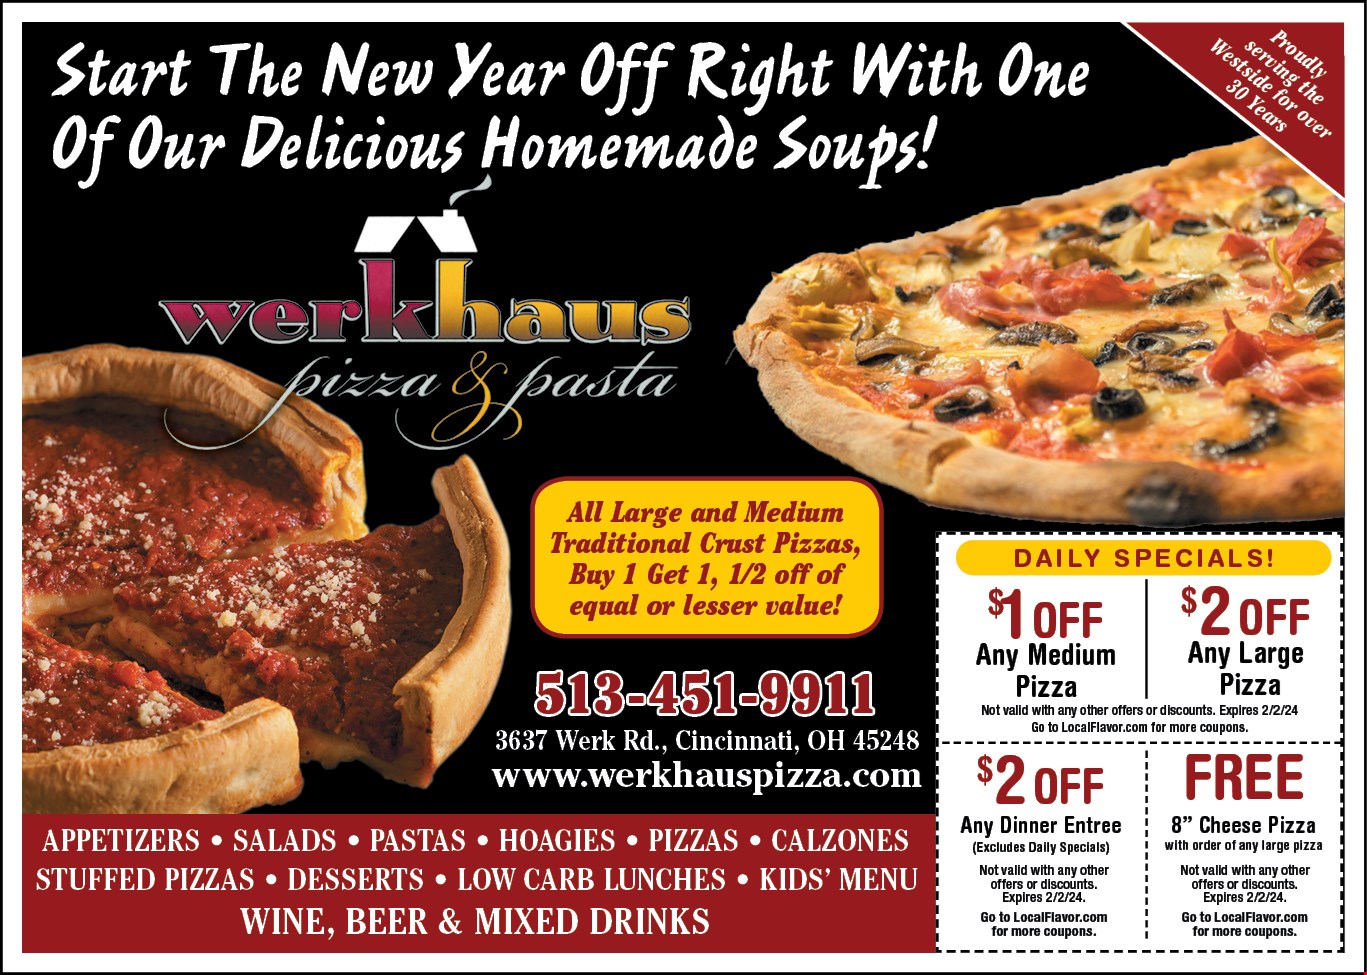 Coupons  Godfather's Pizza